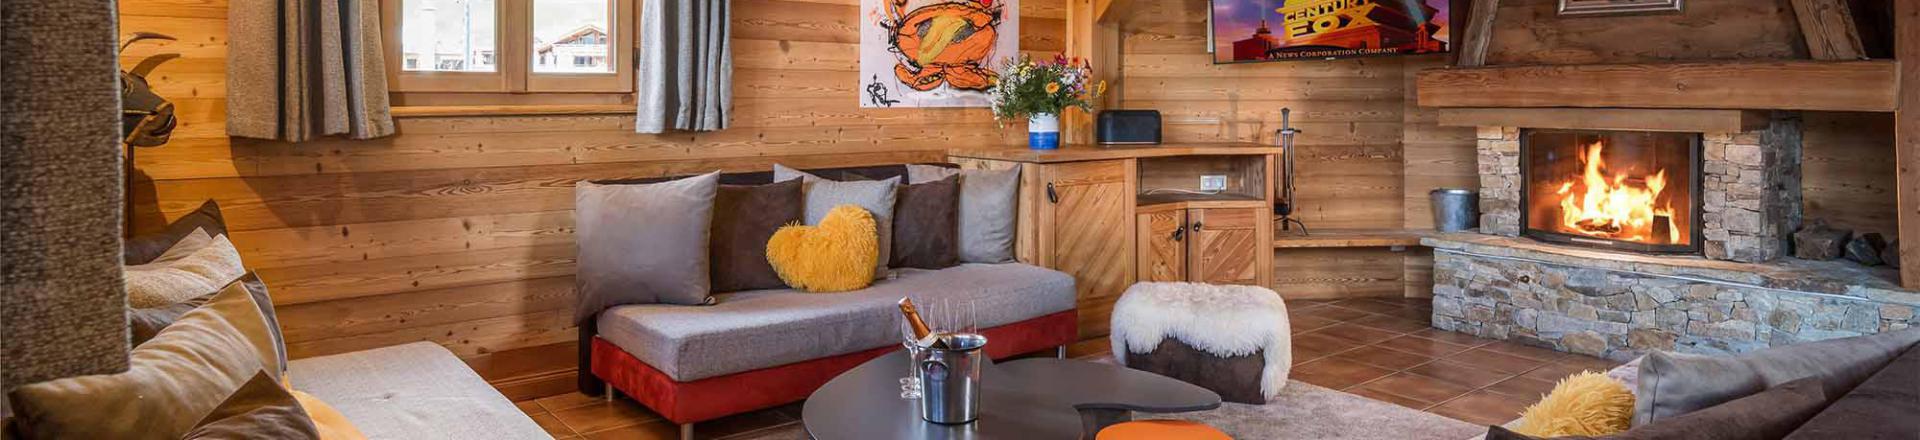 Vacanze in montagna Chalet Loup - Alpe d'Huez - Camino